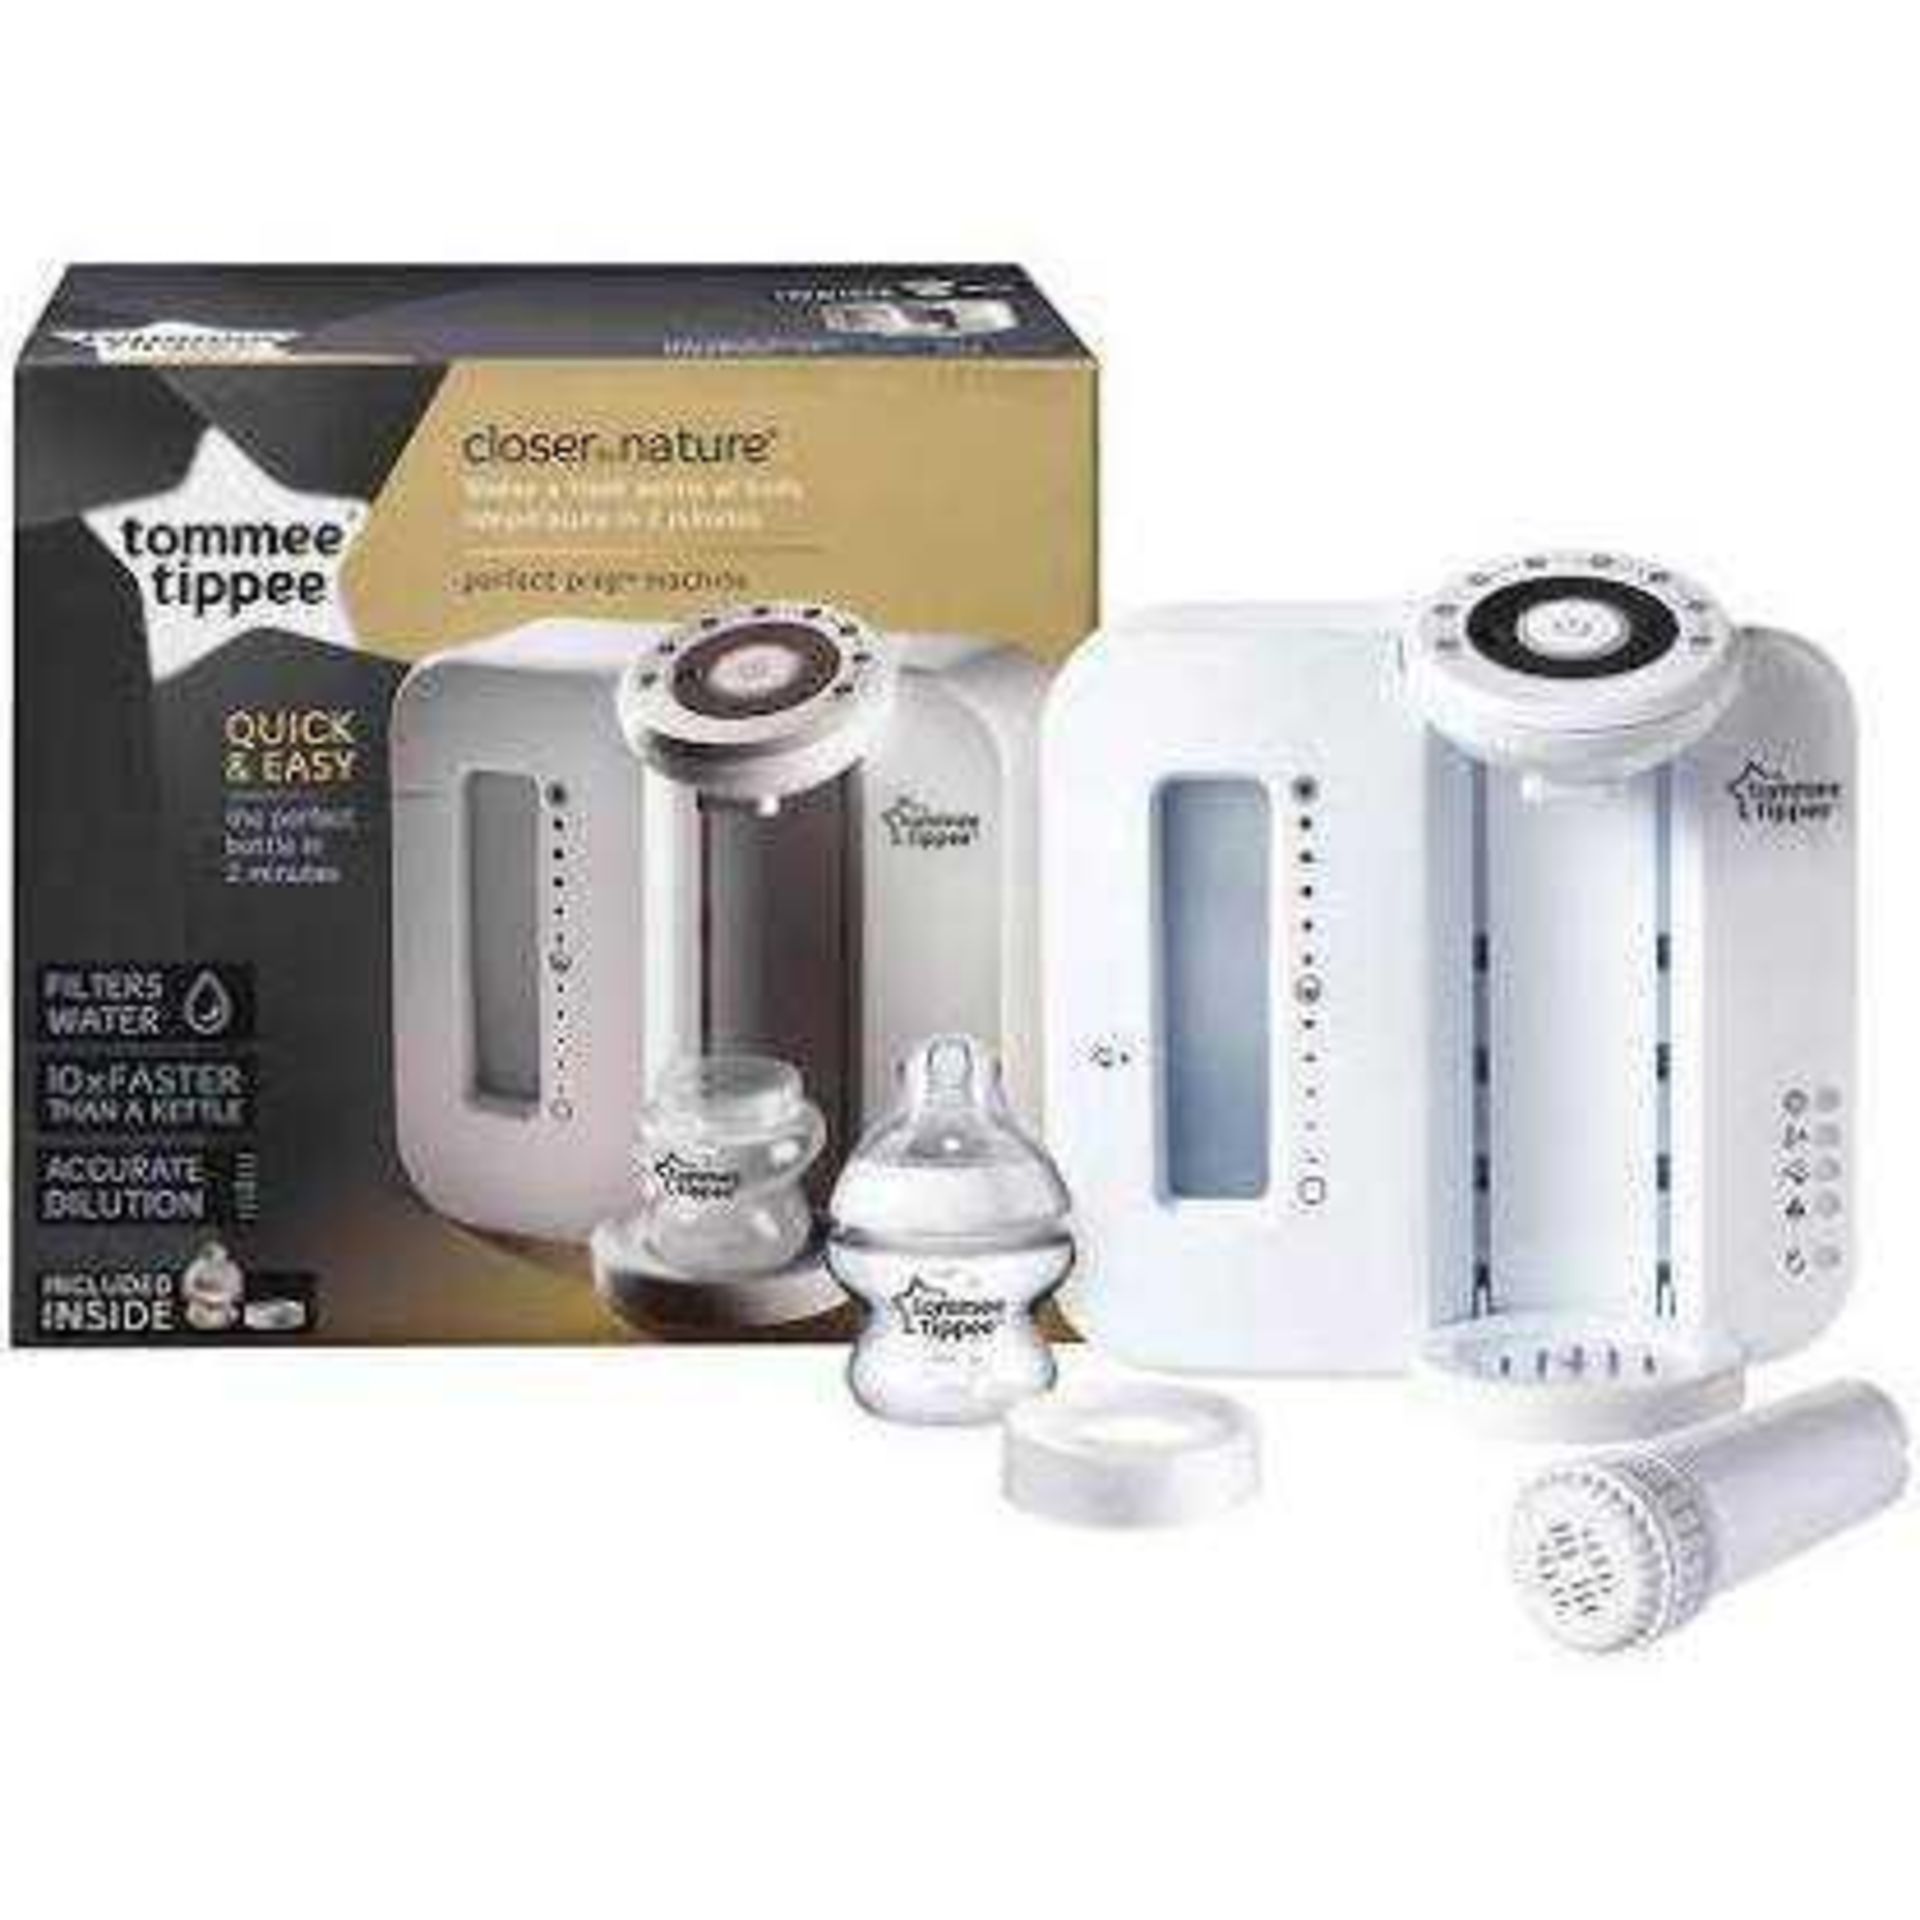 Rrp £70 Tommee Tippee Closer To Nature Perfect Preparation Bottle Warming Station With Built-In Wate